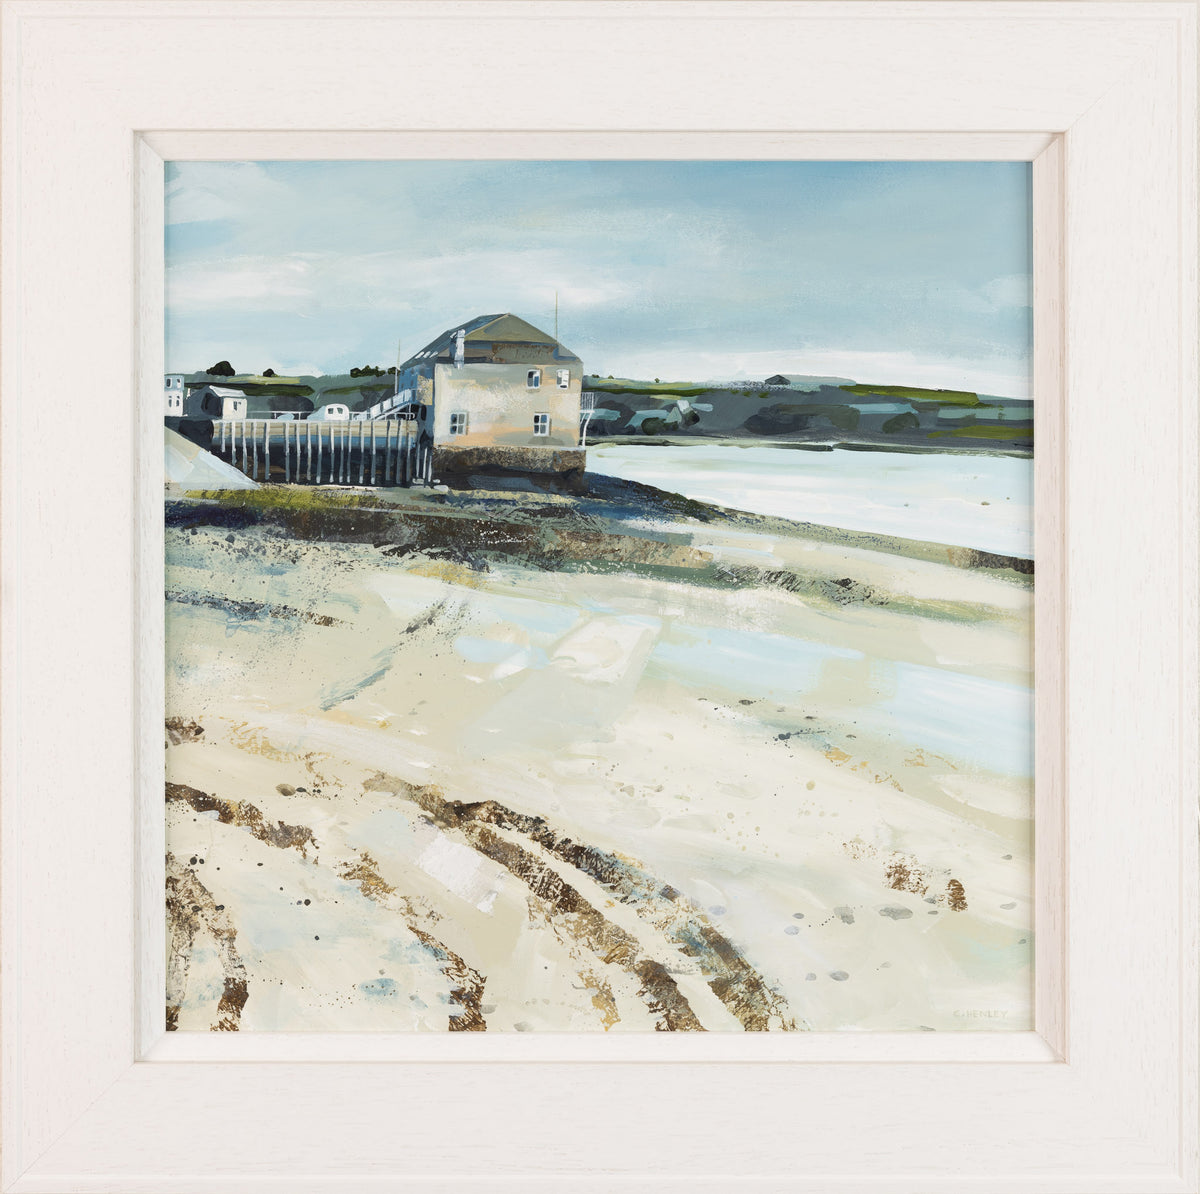 &#39;The Beach at Rock&#39; a mixed media original by Claire Henley, available at Padstow Gallery, Cornwall